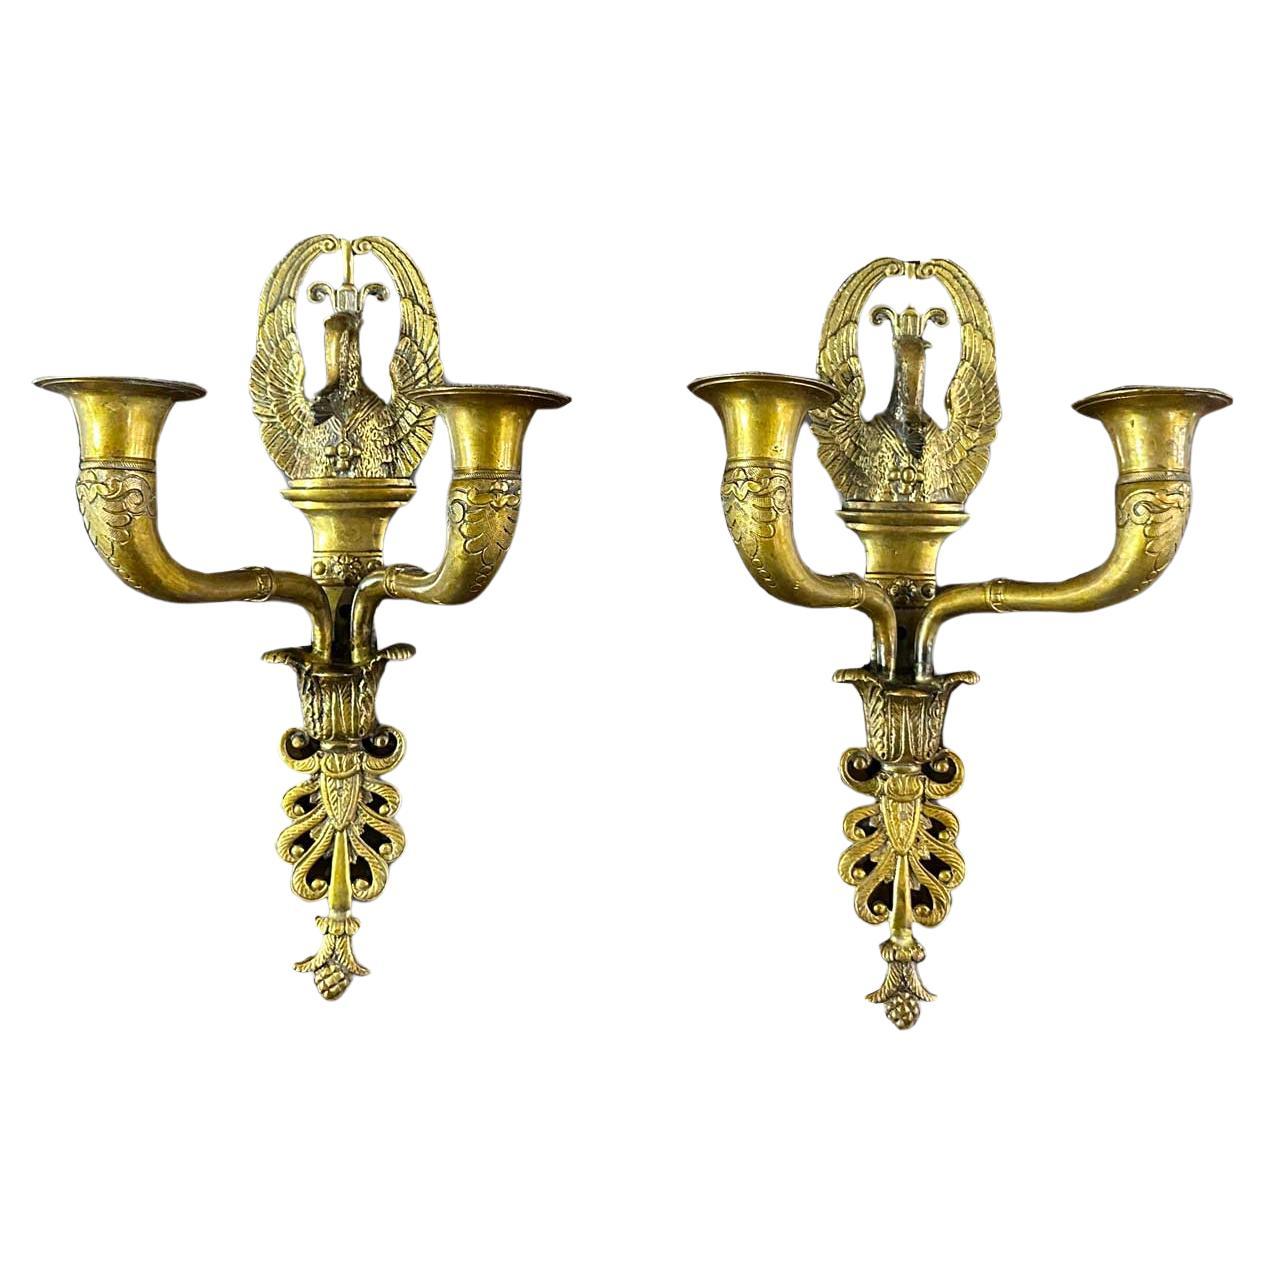 SECOND HALF OF THE 19th CENTURY GOLDEN BRONZE EMPIRE APPLIQUES  For Sale